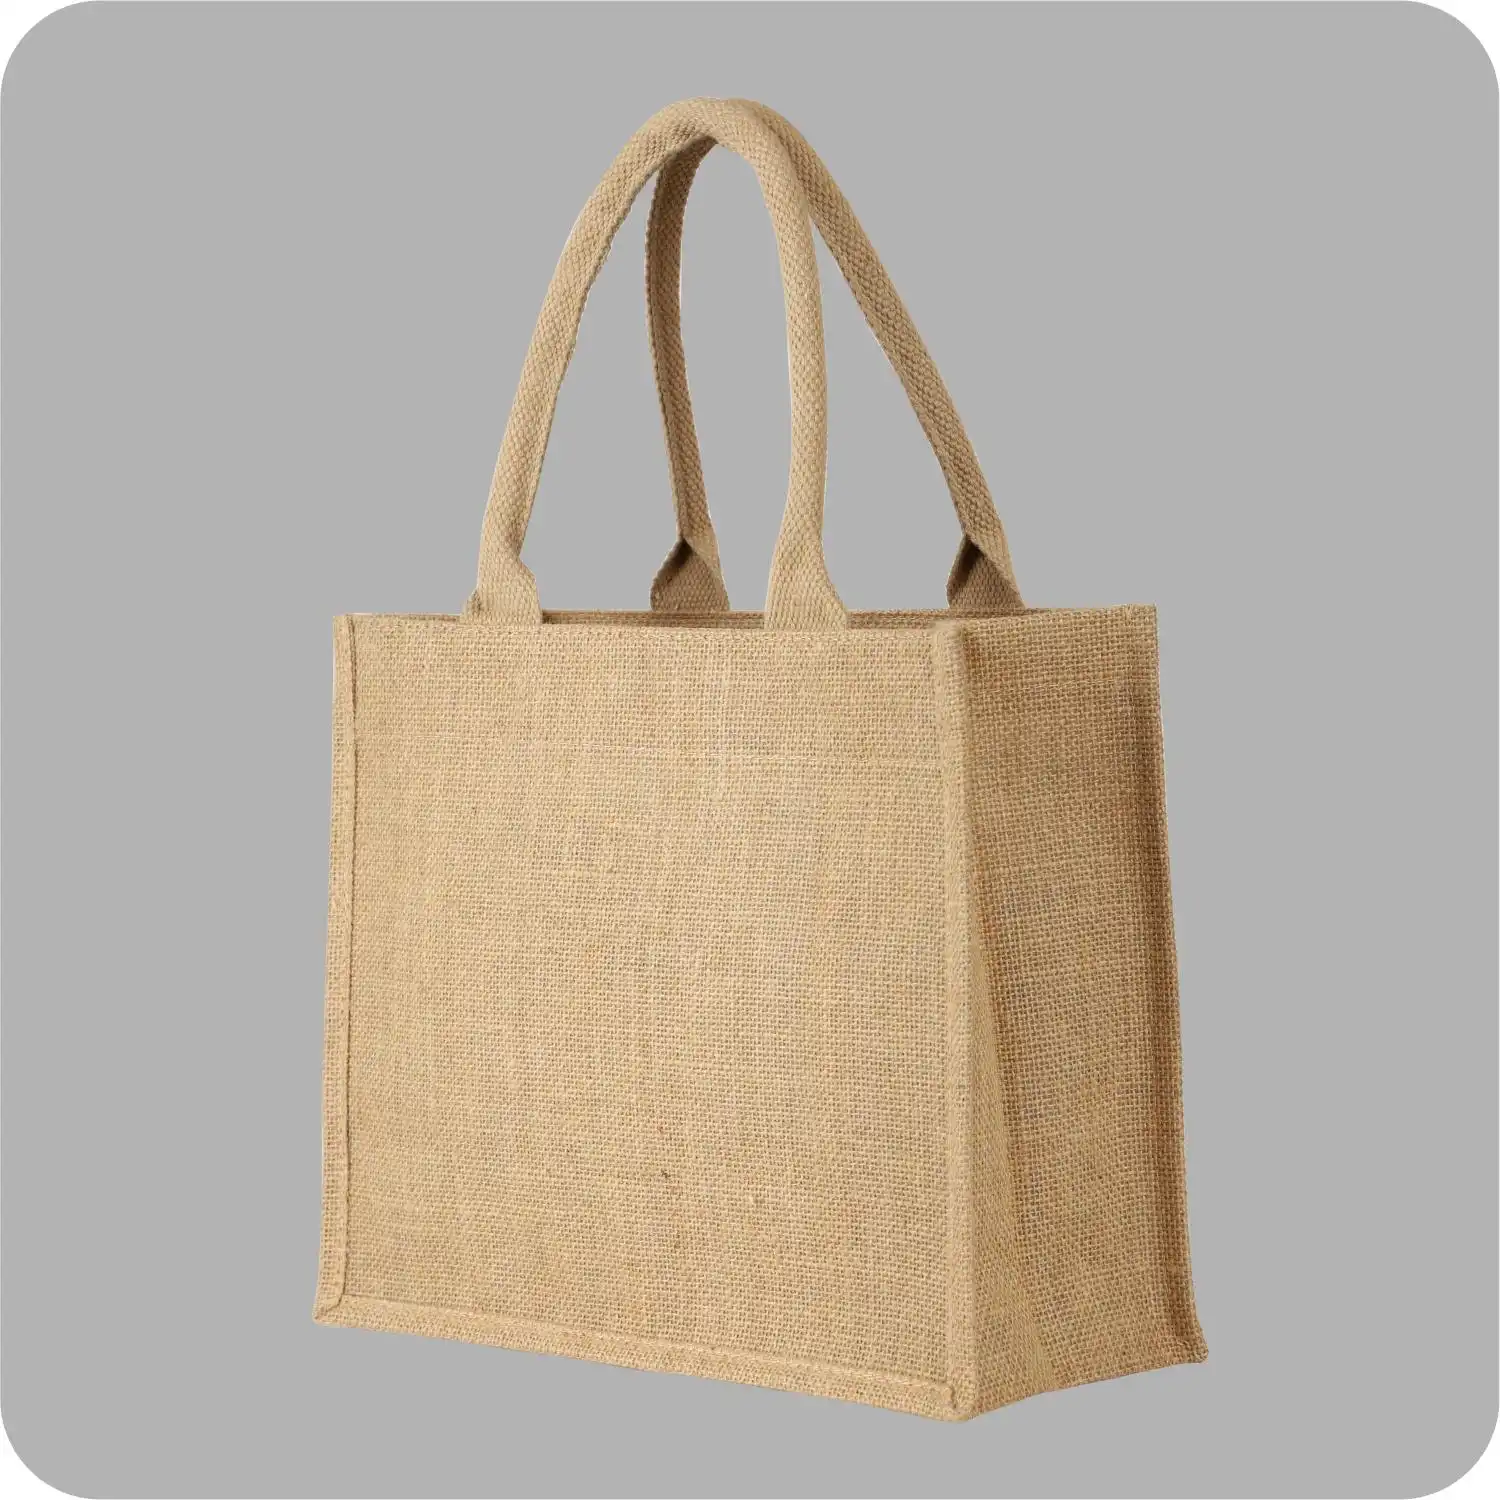 Rectangular Shaped, Made of pure Jute Carry Bags for Versatile Use 